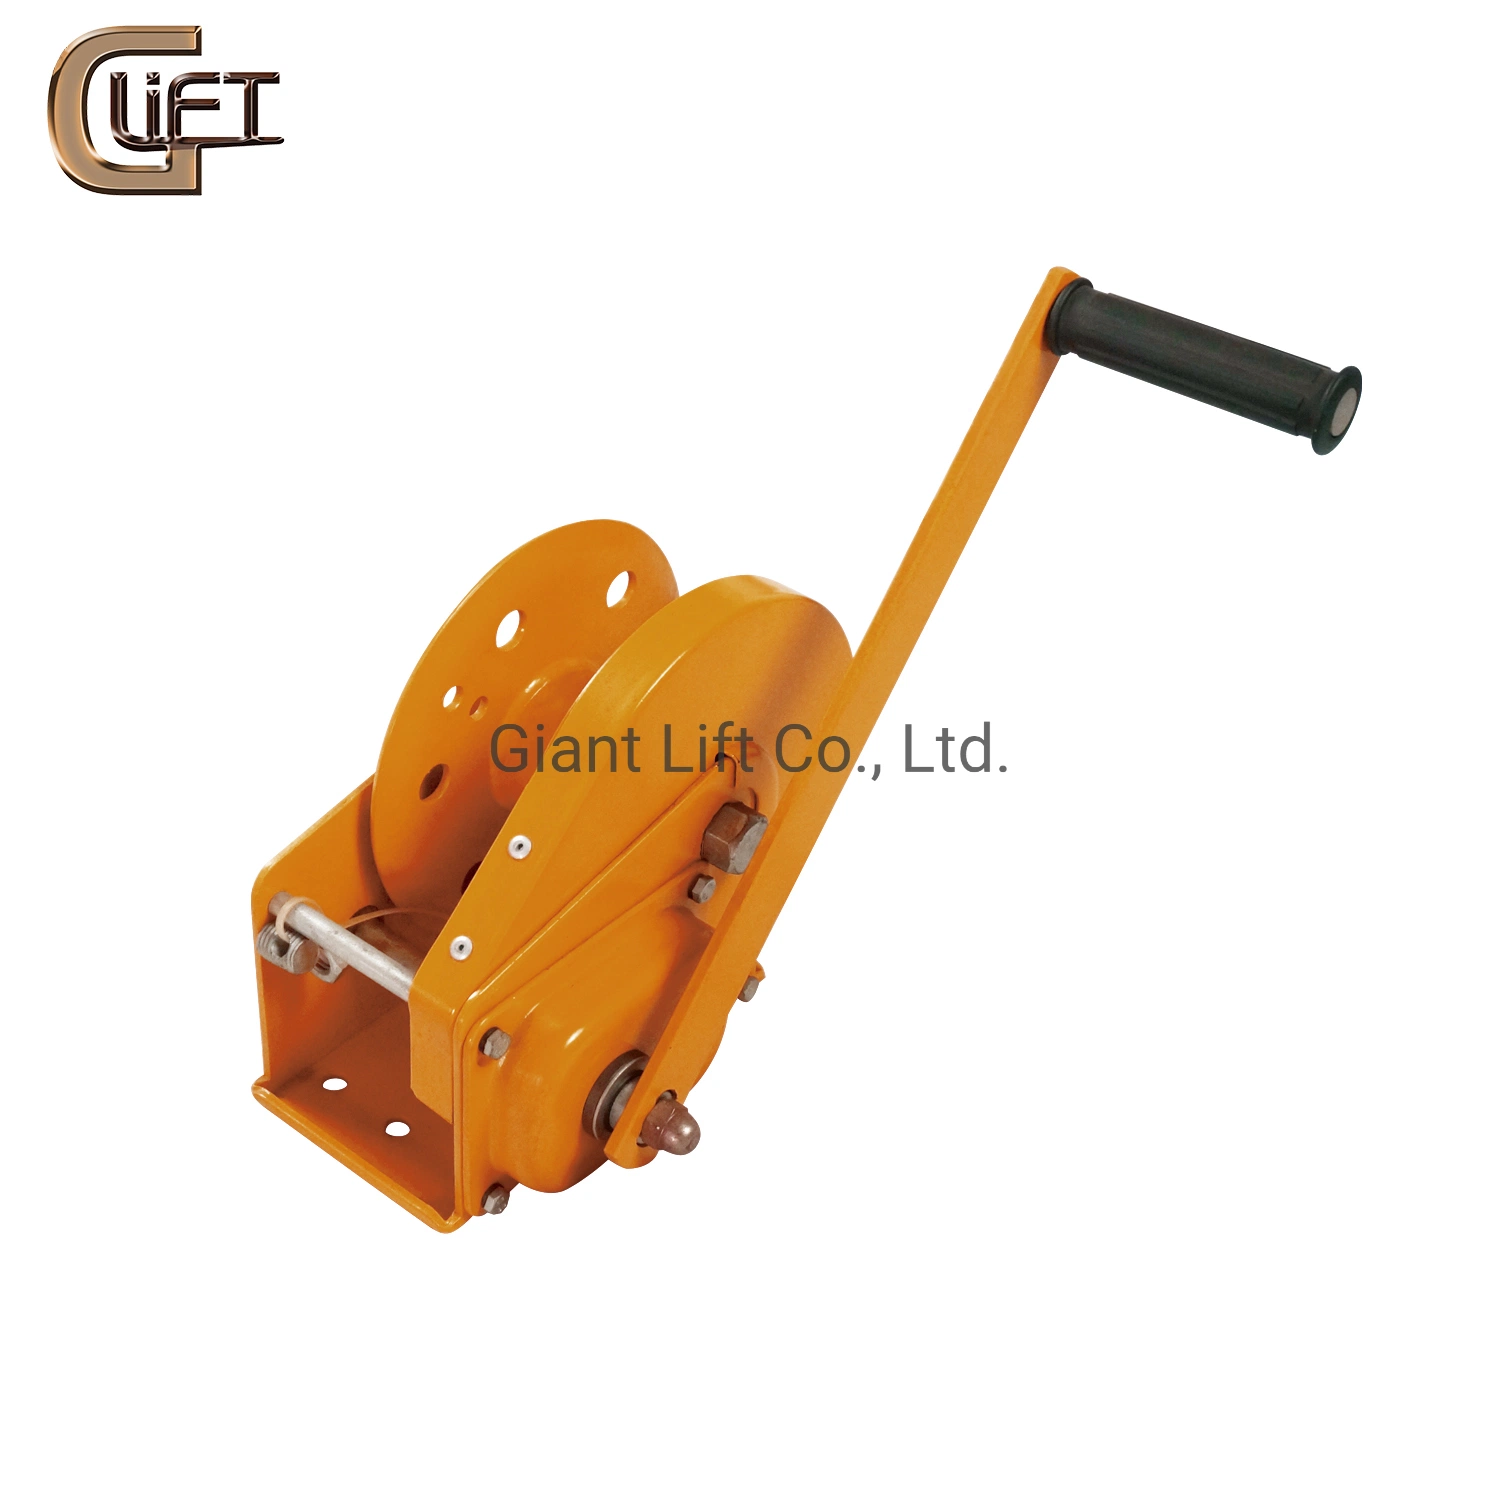 Hand Winch Hand Puller Manual Winch Manual Puller Ratchet Puller with Auto Brake (BHW)